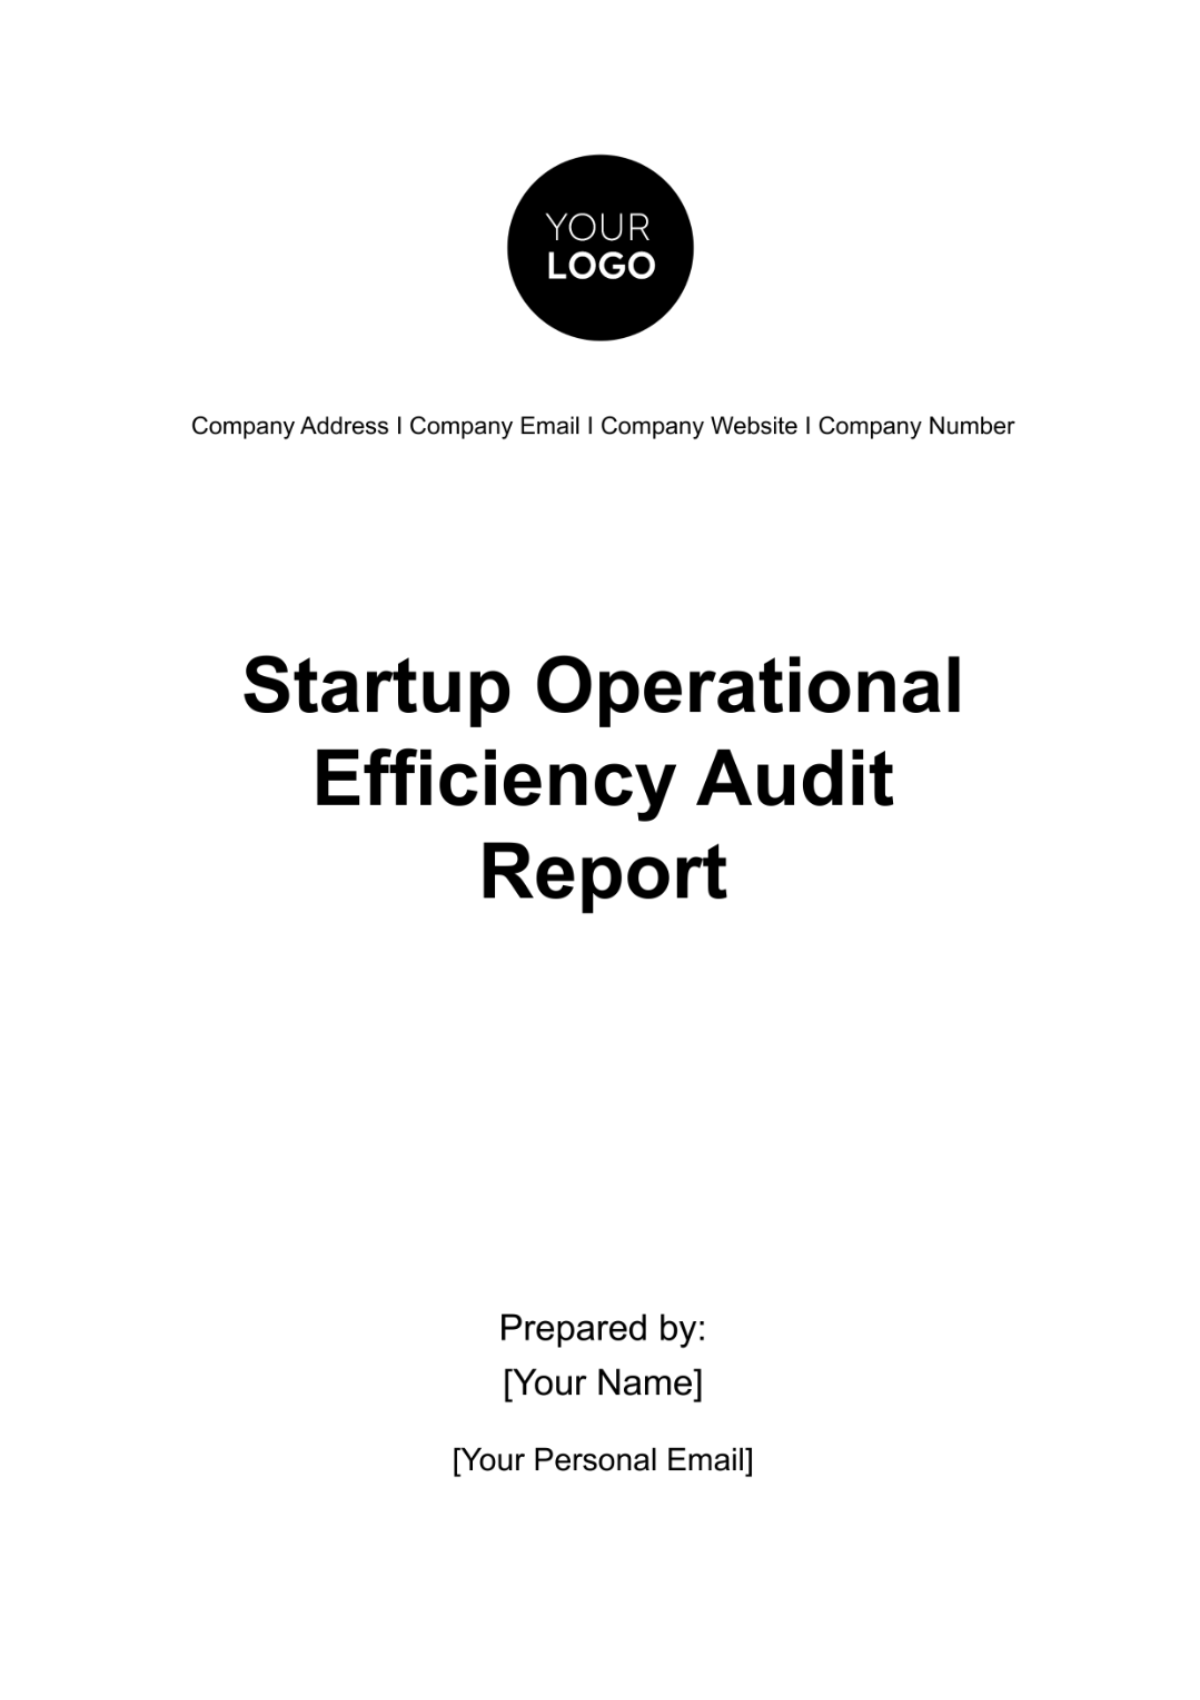 Startup Operational Efficiency Audit Report Template